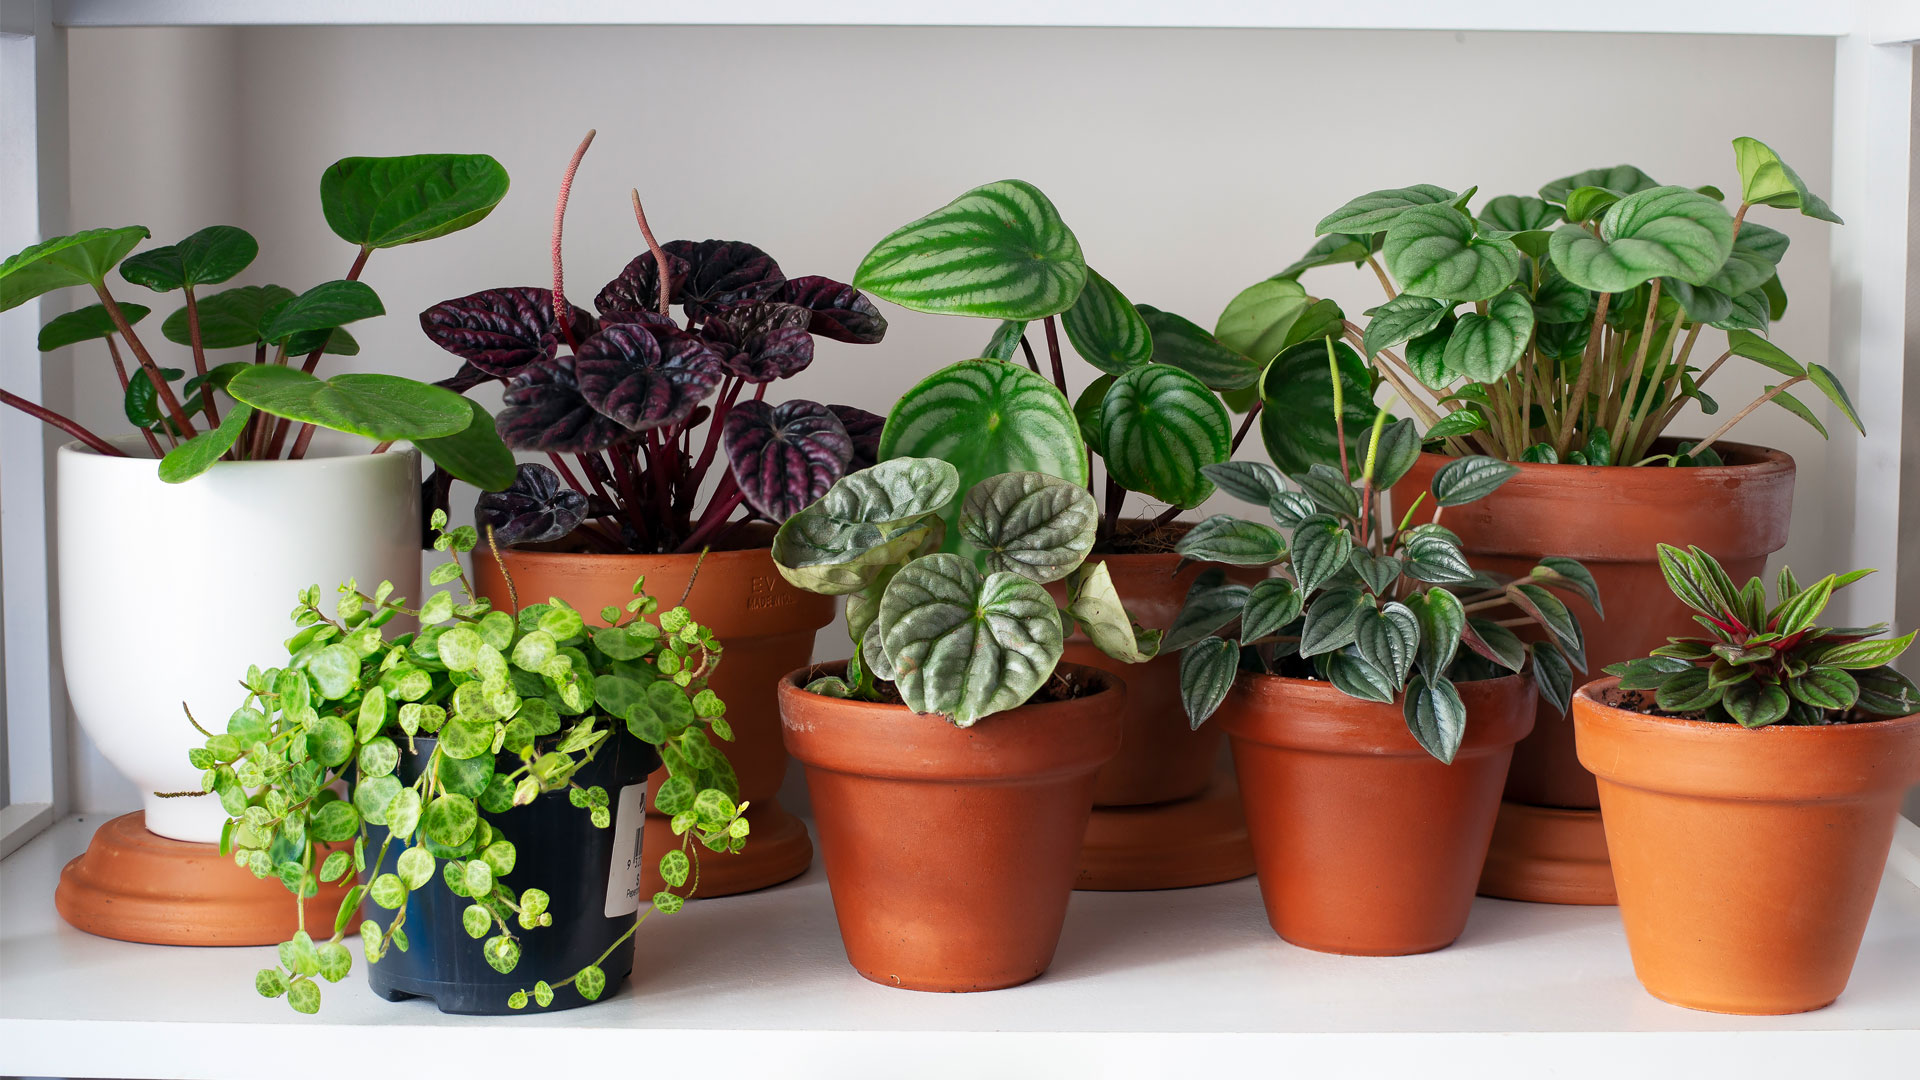 Do indoor plants perform photosynthesis